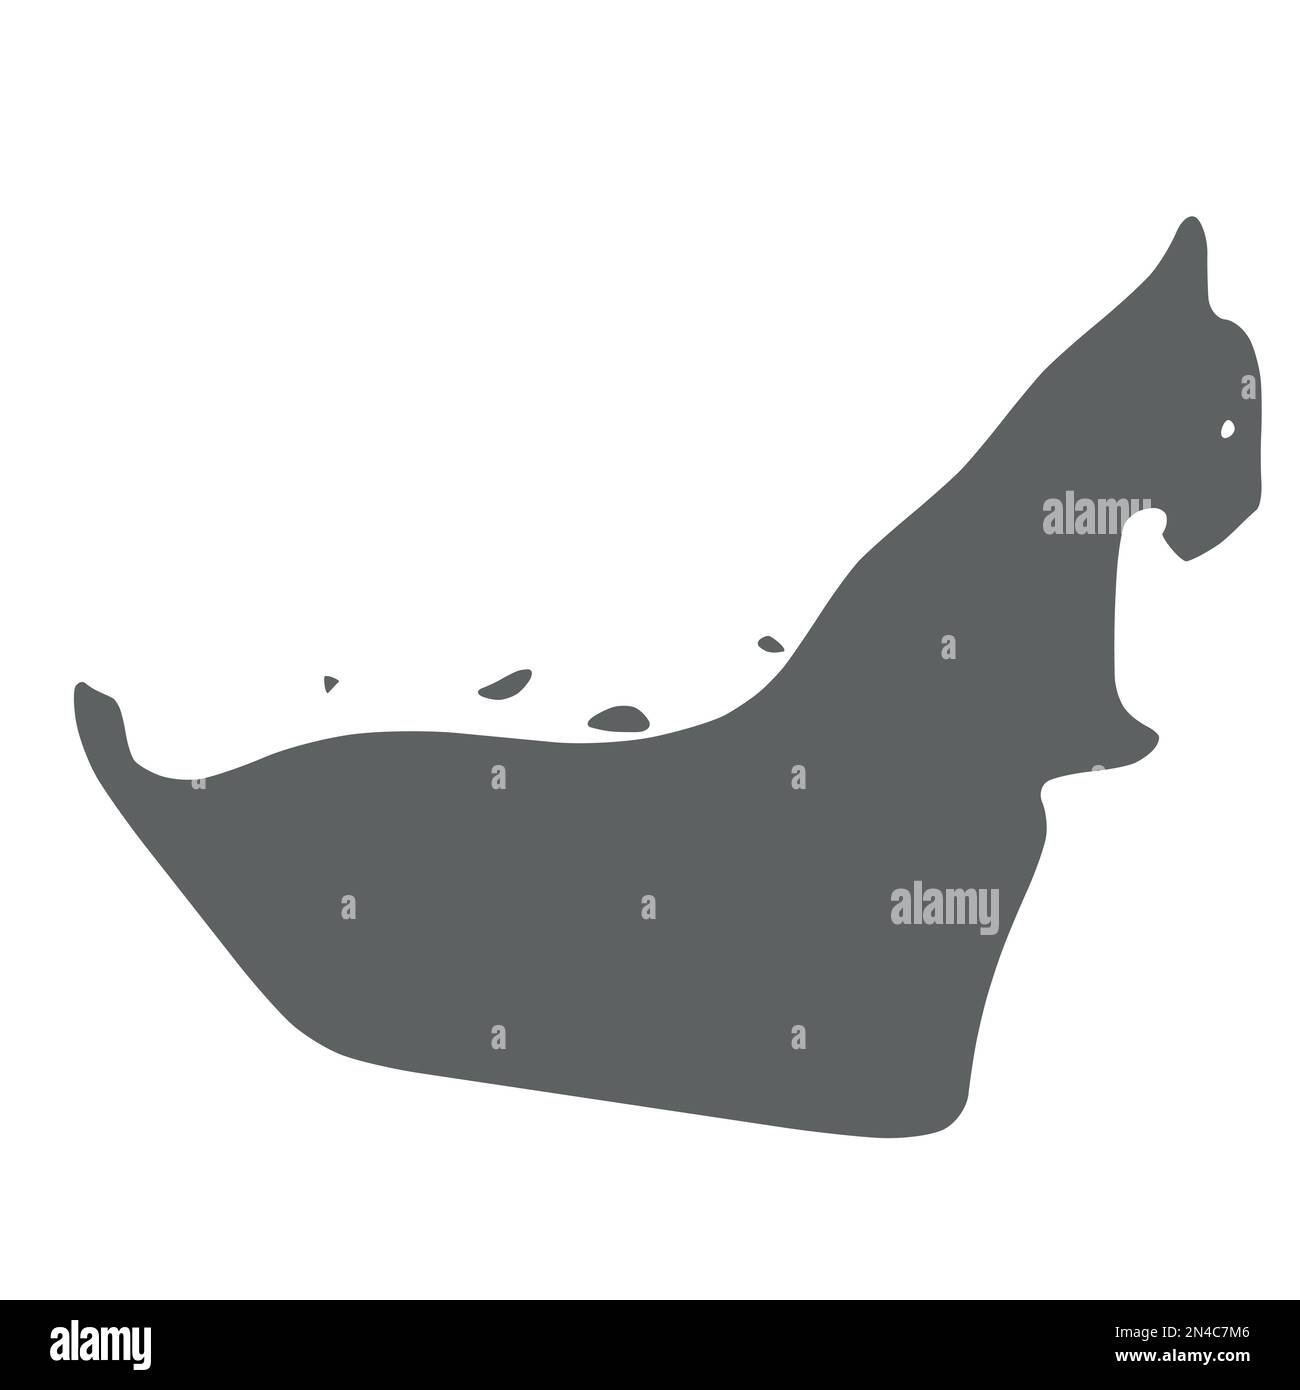 United Arab Emirates, UAE - smooth grey silhouette map of country area. Simple flat vector illustration. Stock Vector